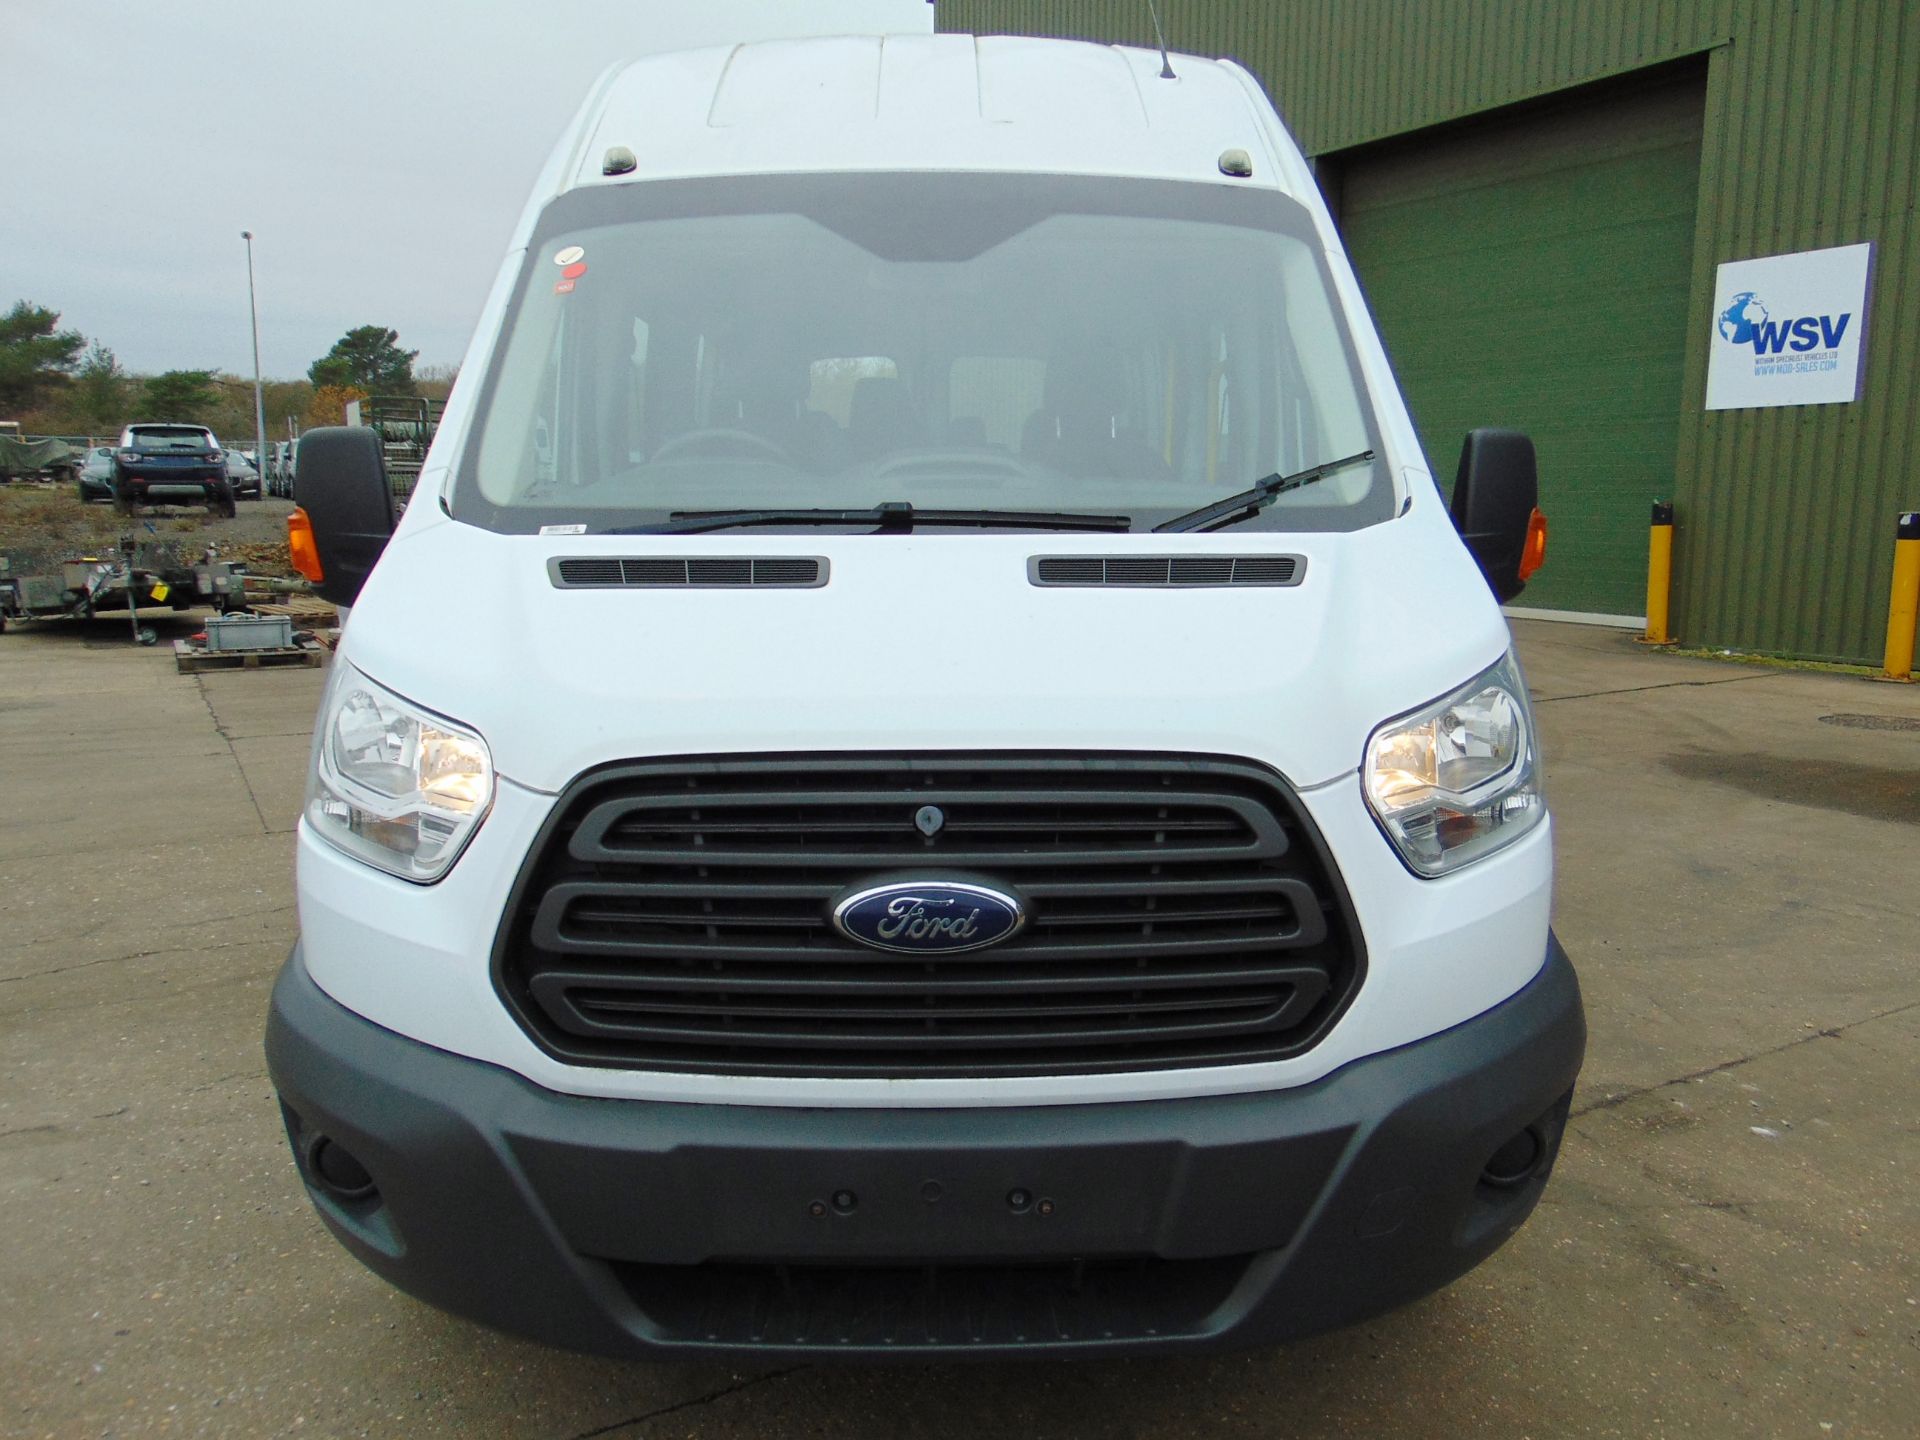 2014 Ford Transit 2.2 TDCi 460E 17 Seat Minibus ONLY 74,813 km! - Image 3 of 36